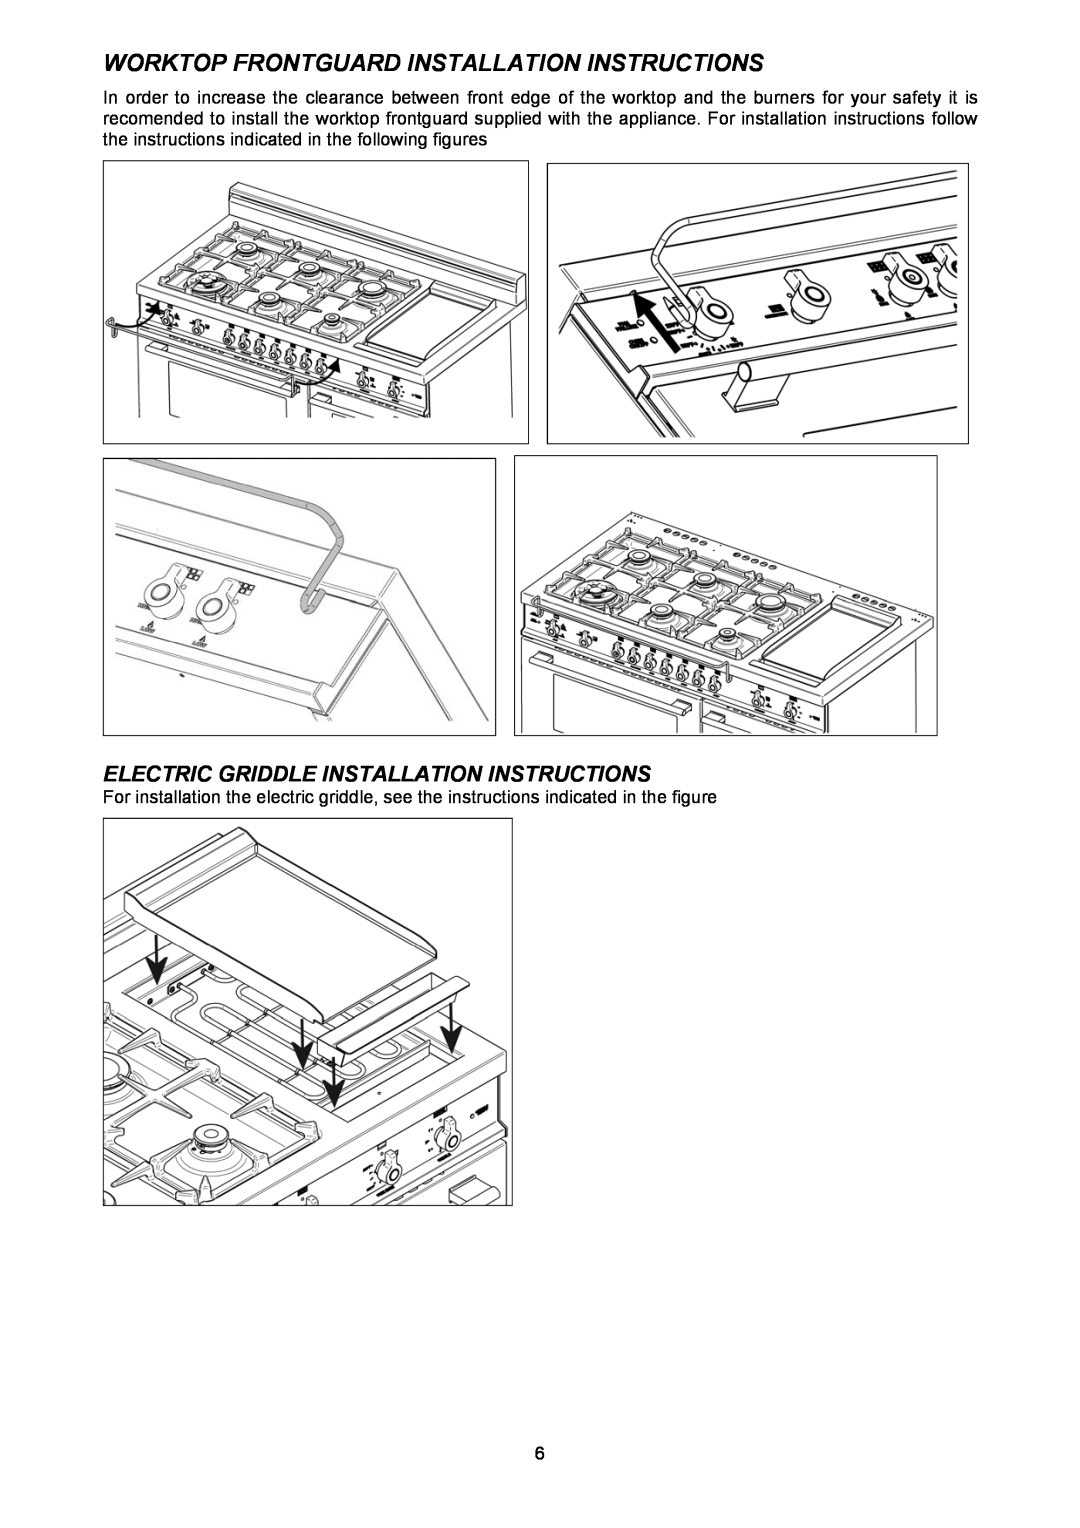 Bertazzoni X486GGGVX dimensions Worktop Frontguard Installation Instructions, Electric Griddle Installation Instructions 